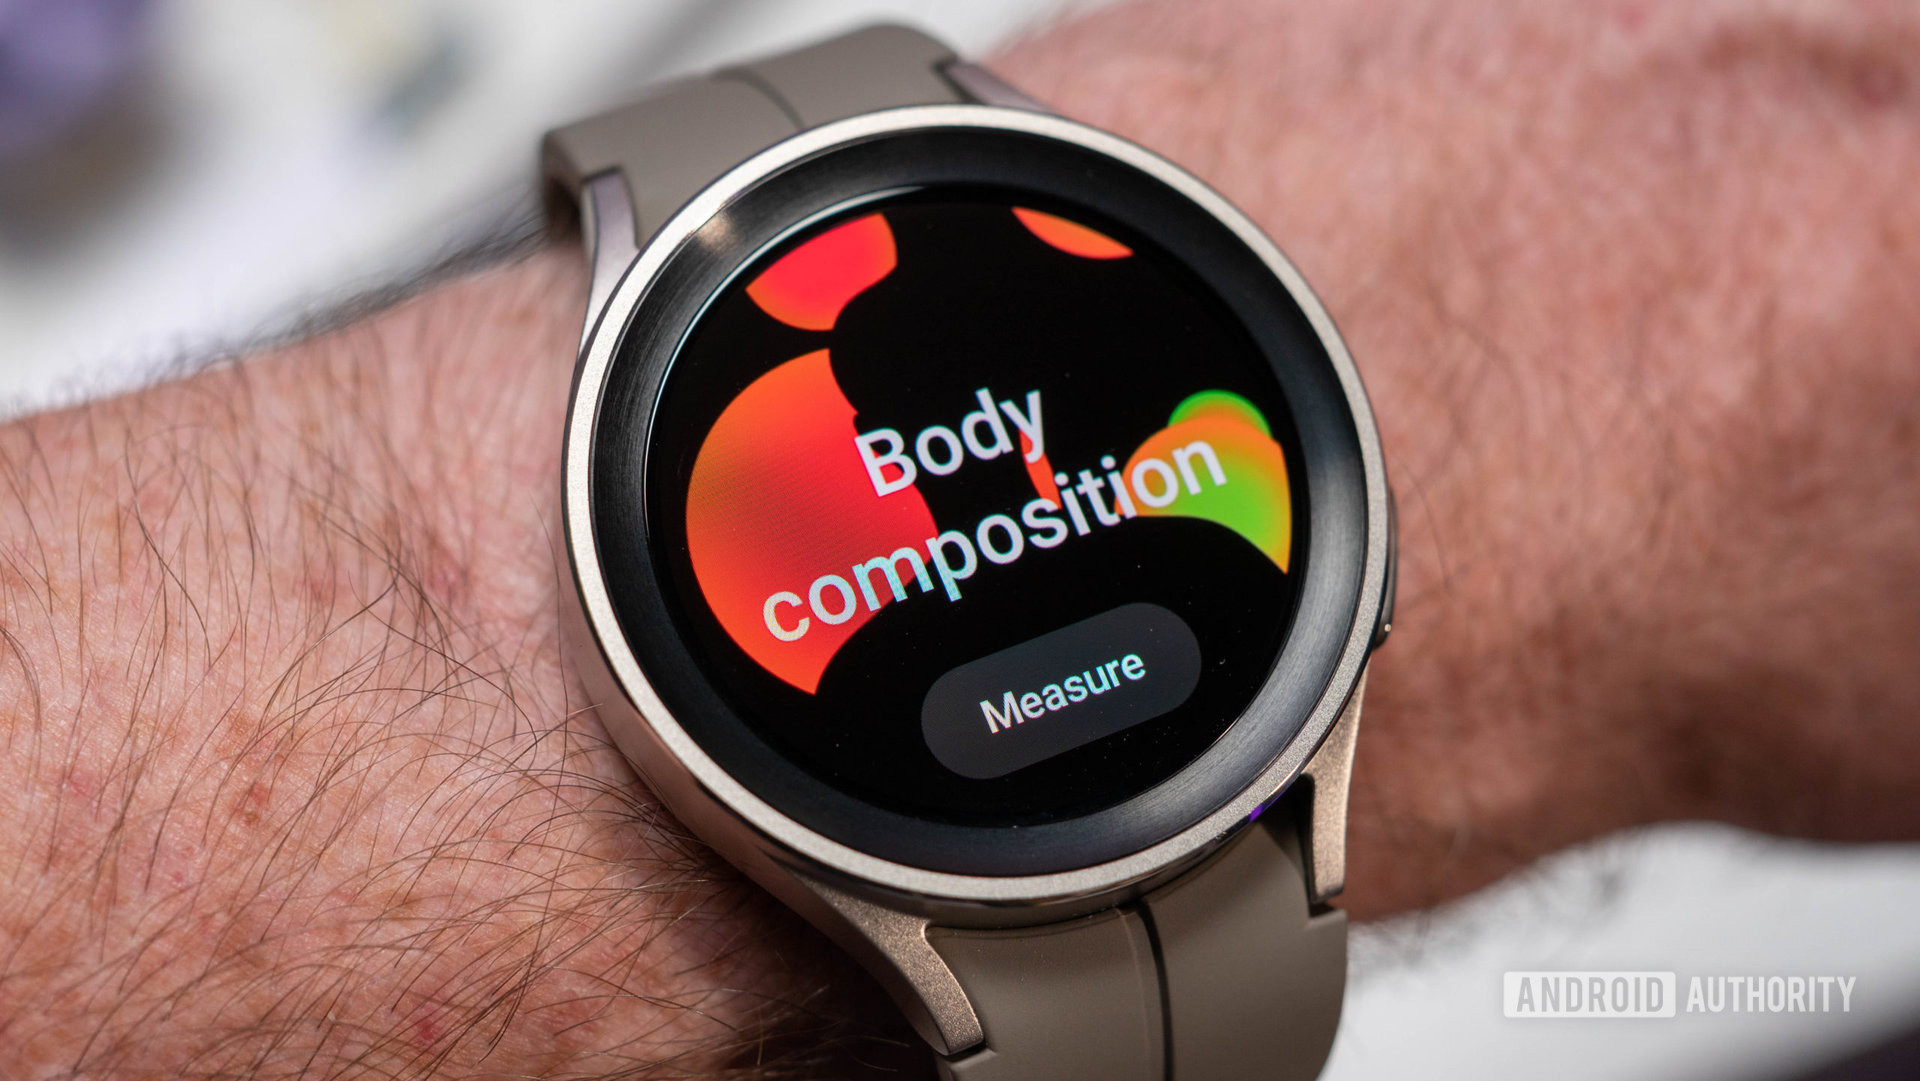 Samsung Galaxy Watch 5 Pro in silver color showing off body composition screen with fluoroelastomer strap on wrist